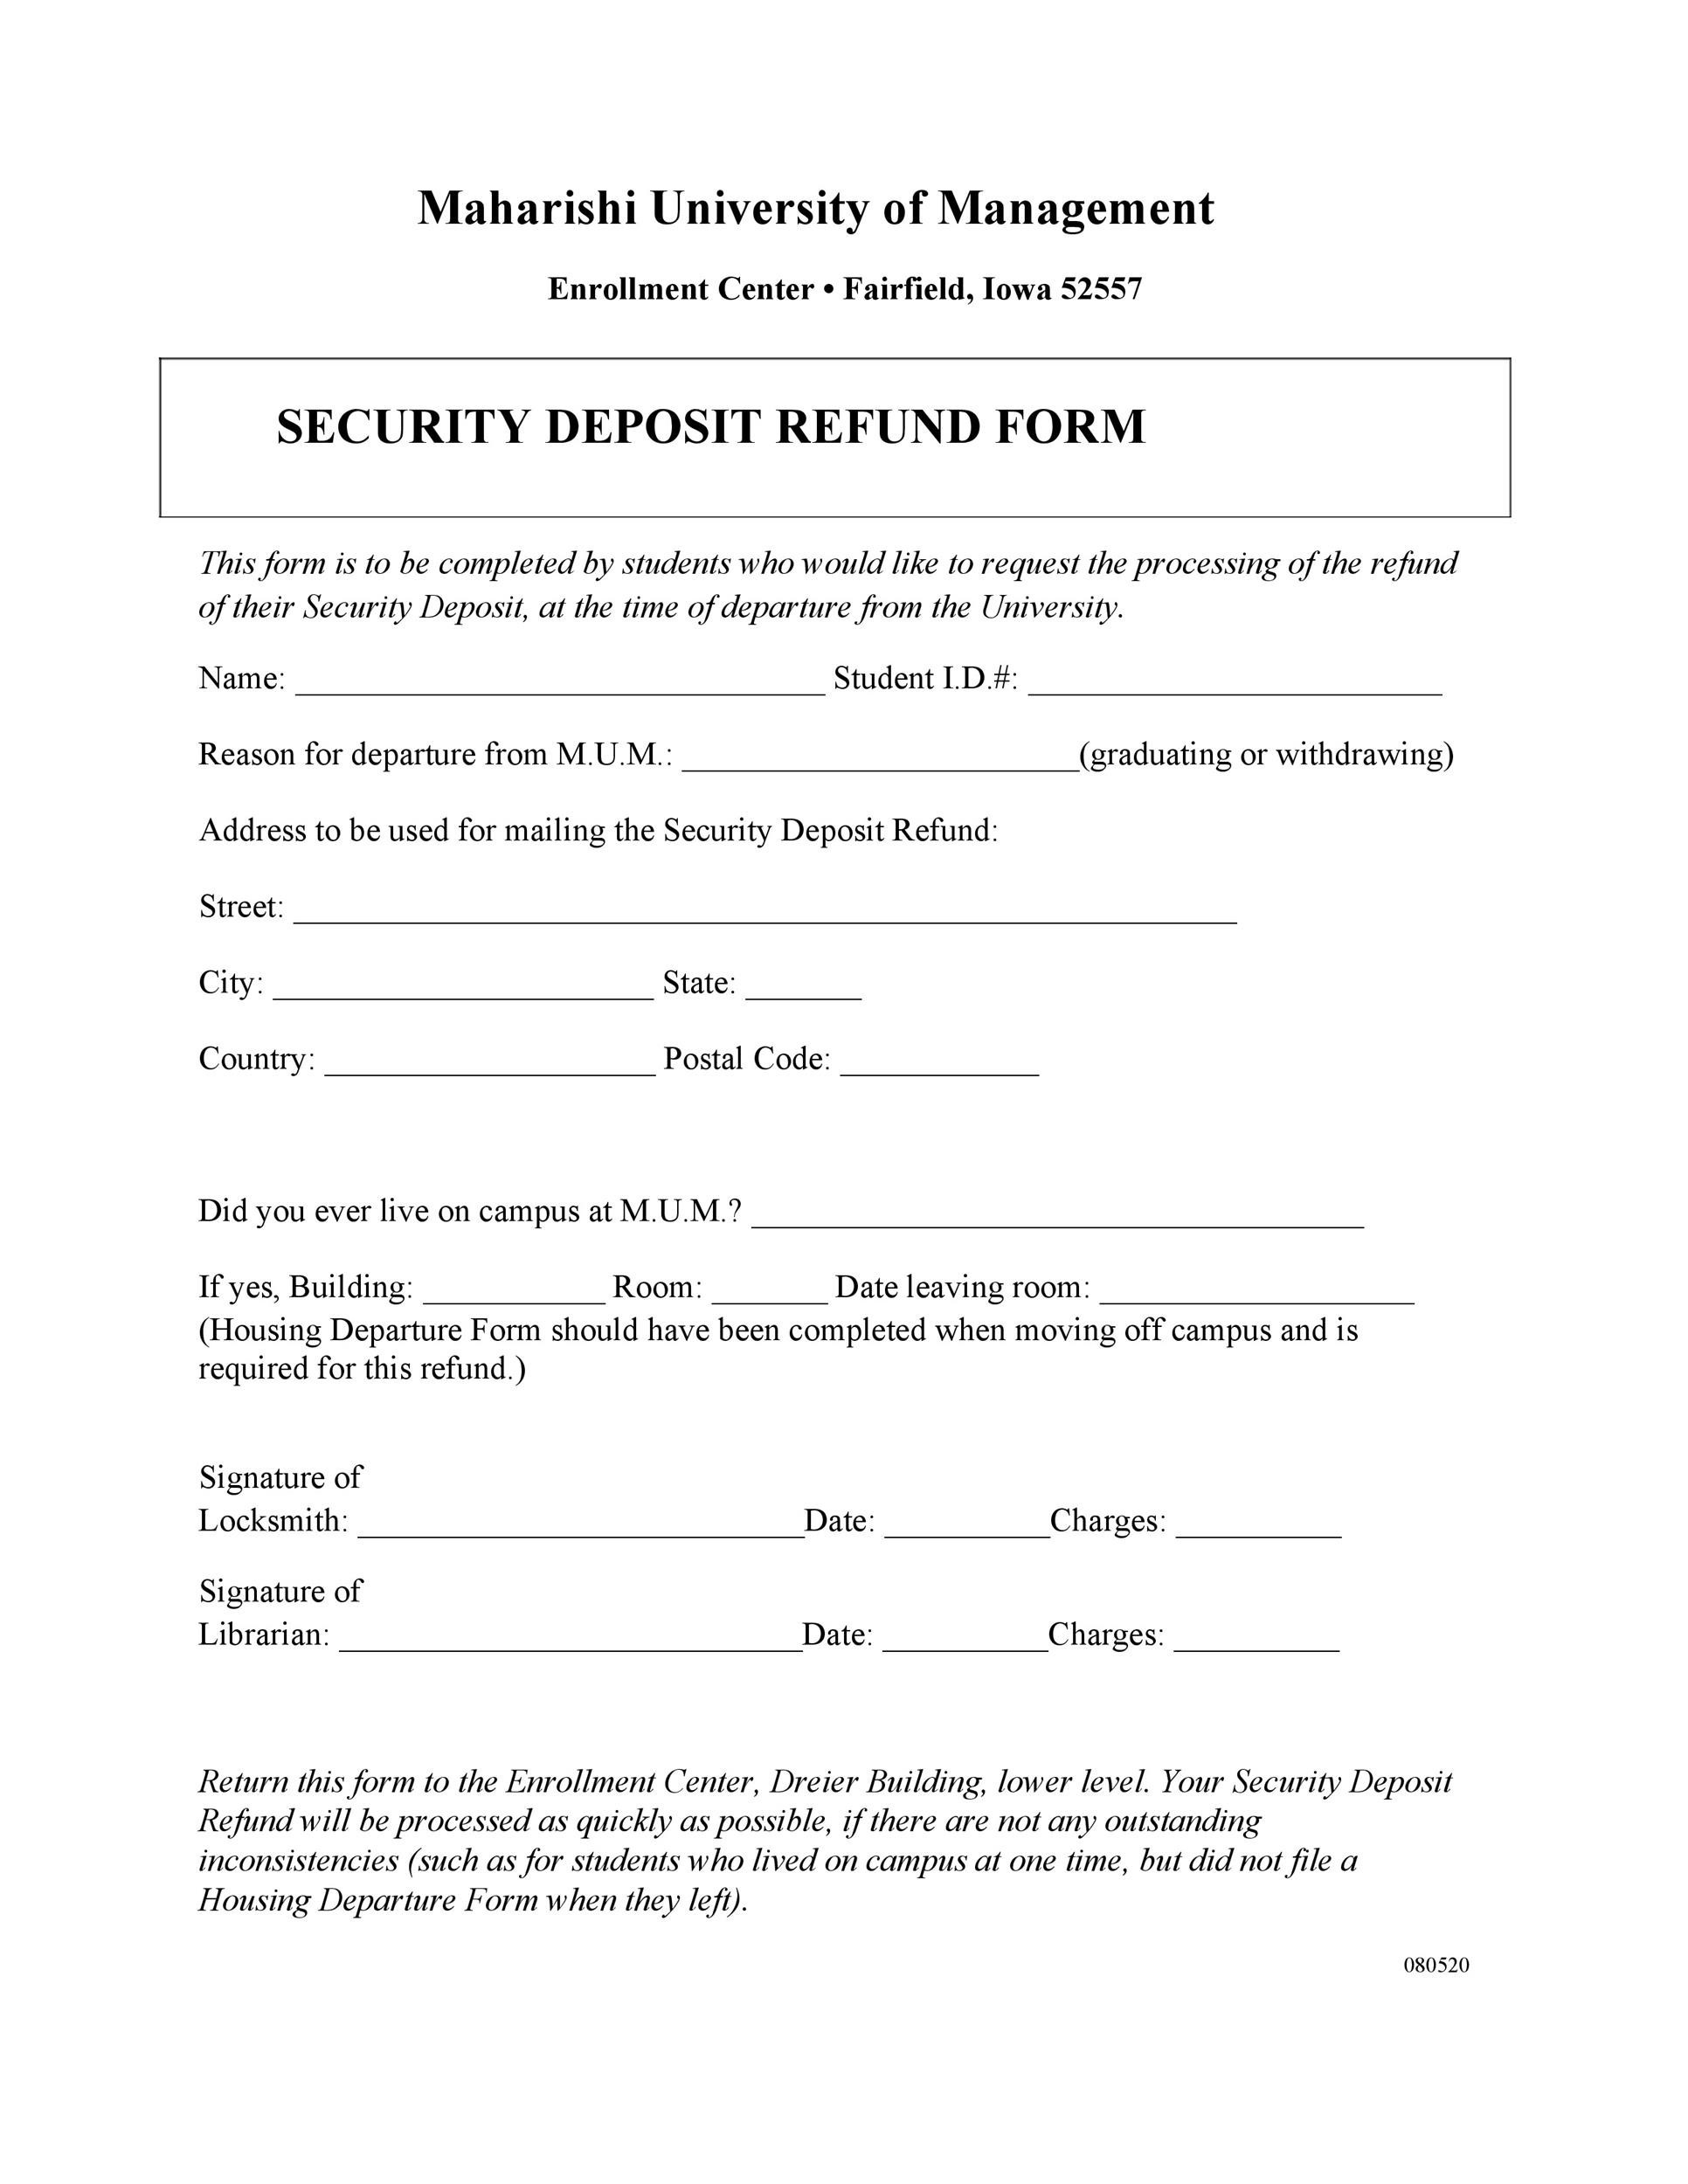 10 Effective Security Deposit Return Letters [MS Word] ᐅ TemplateLab With Regard To Security Deposit Refund Letter Template In Security Deposit Refund Letter Template